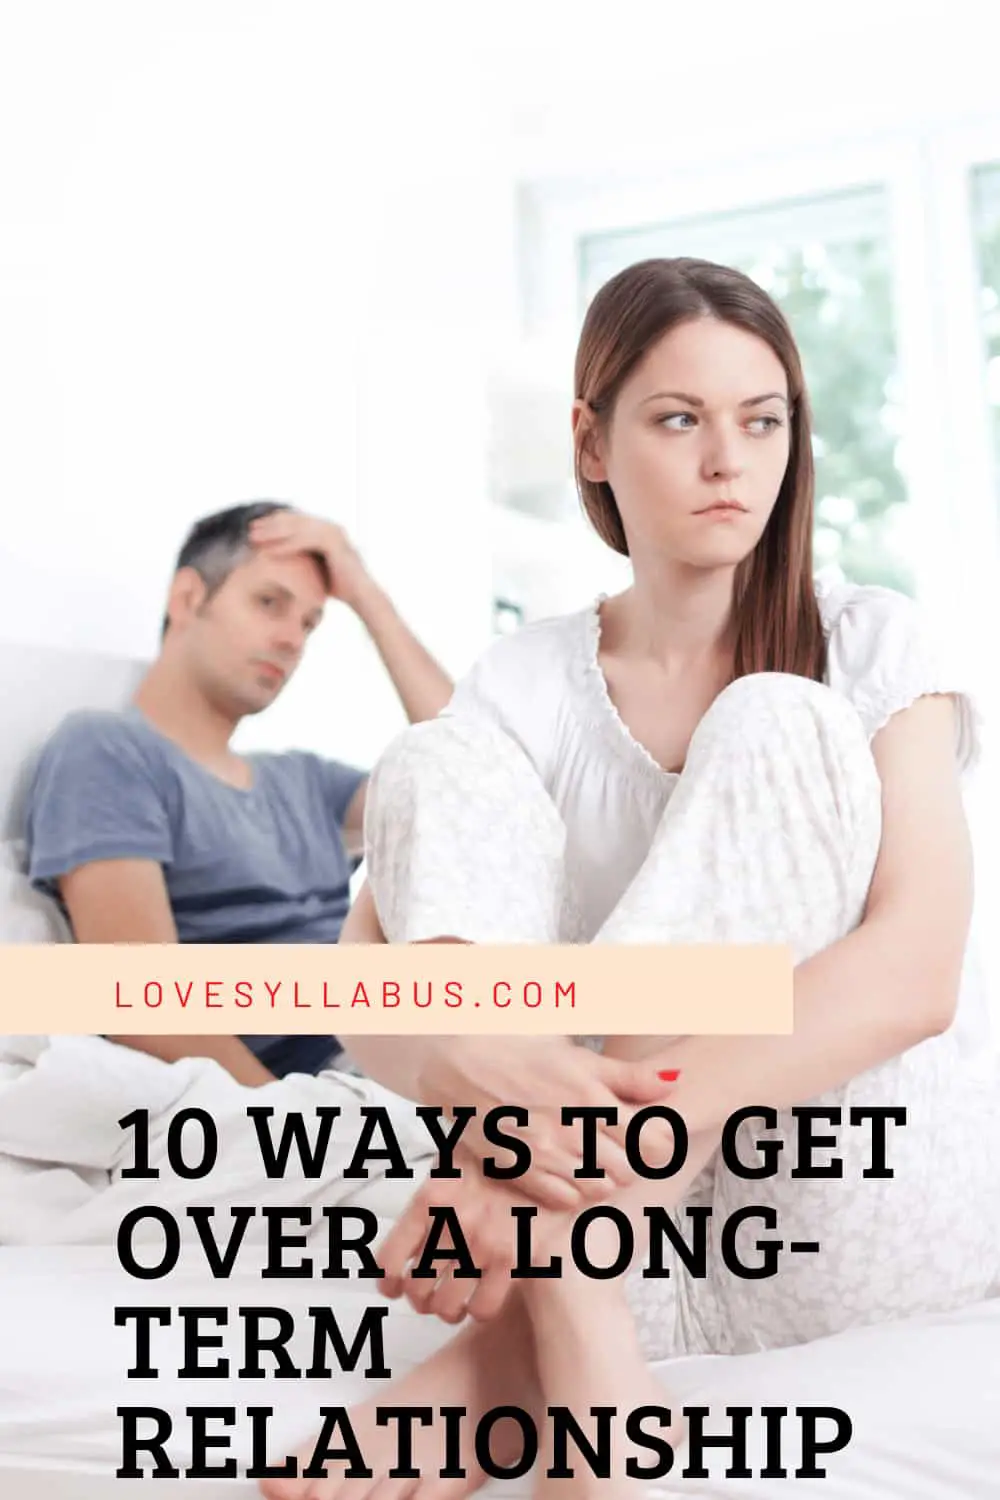 how To Get Over A Long-Term Relationship